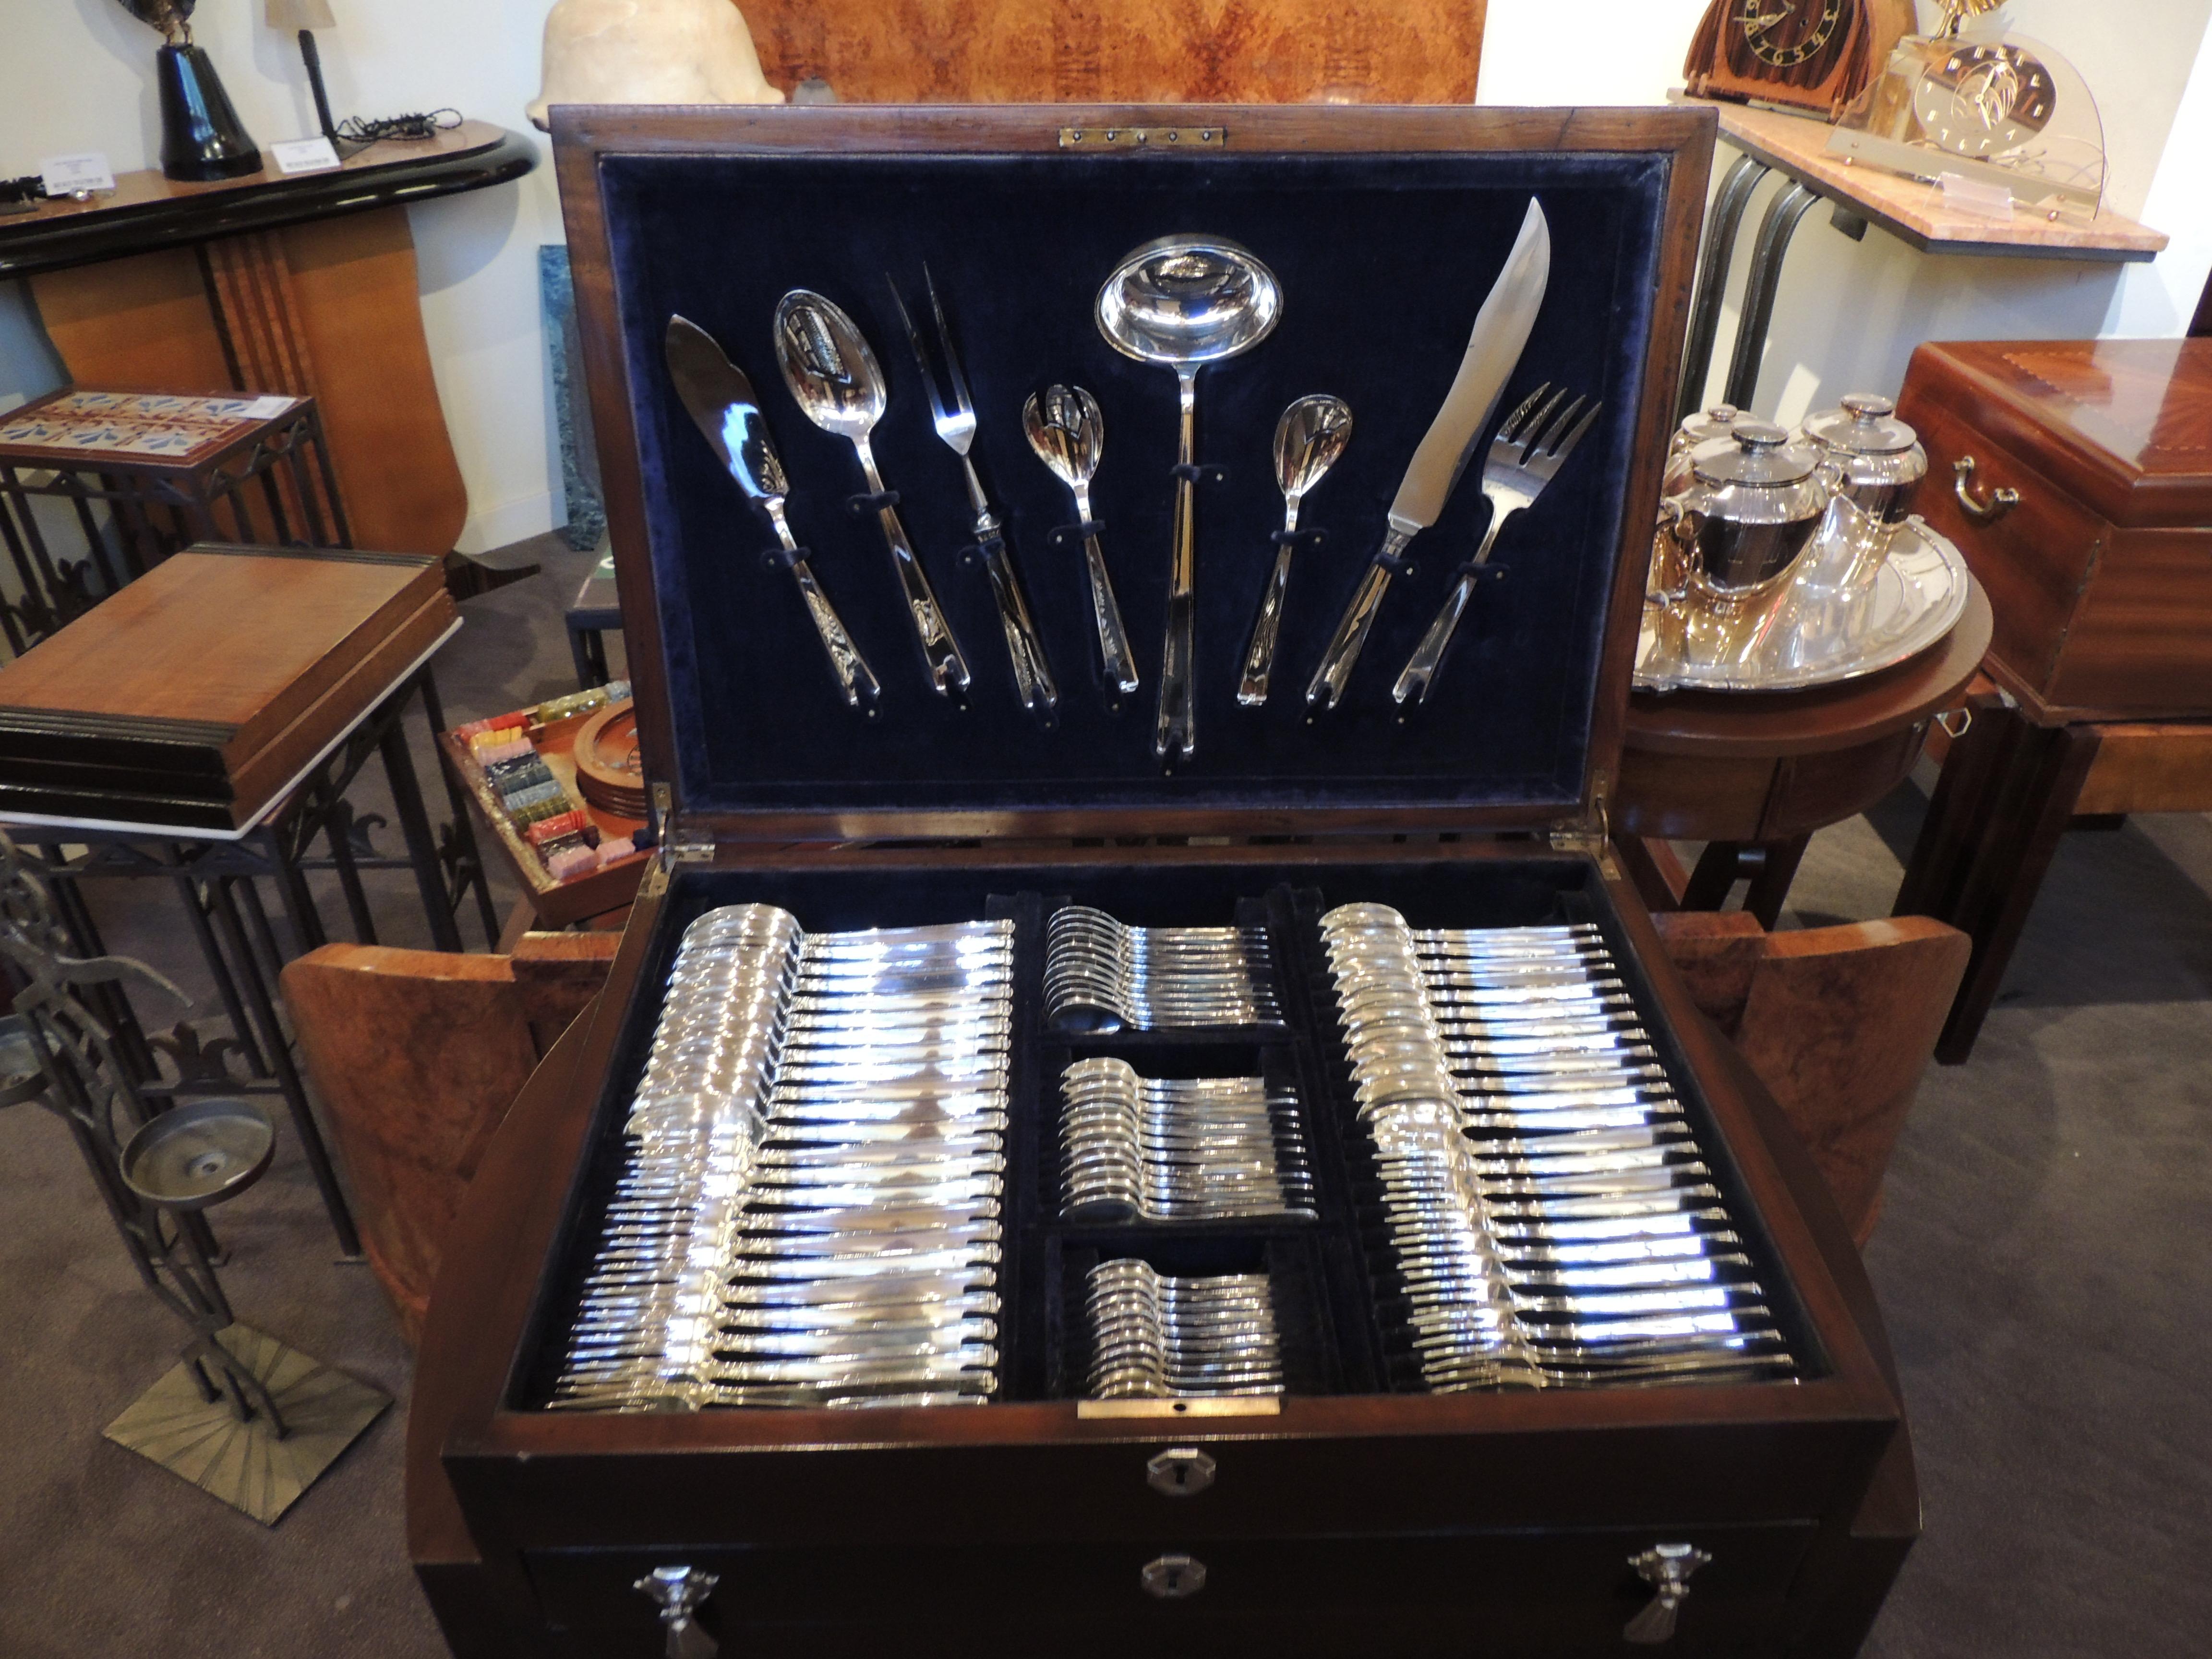 A complete set of silver service for 12 in an Art Deco Cabinet from the famous silversmiths at Plata Lappas. Nothing is as elegant as heavily plated silverware in fitted drawers of a custom cabinet designed to hold each piece. Argentine in origin